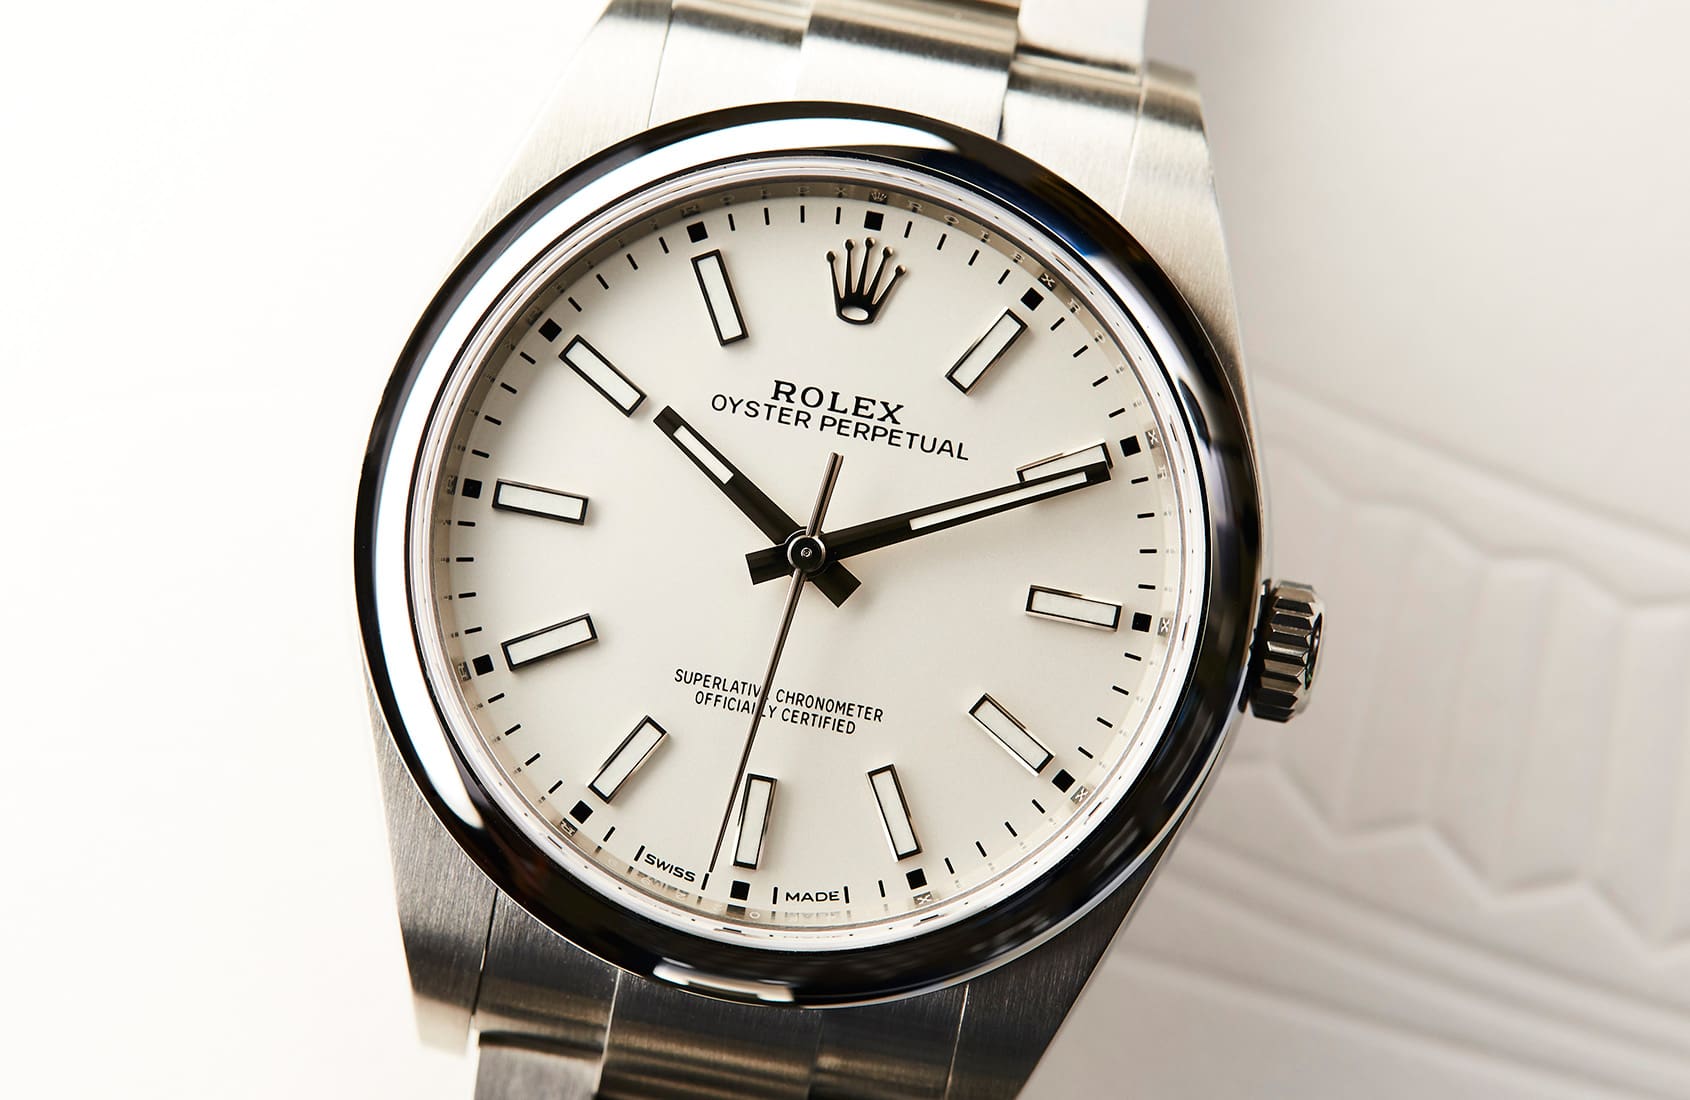 The Rolex Oyster Perpetual 39 – black, white and utterly classic